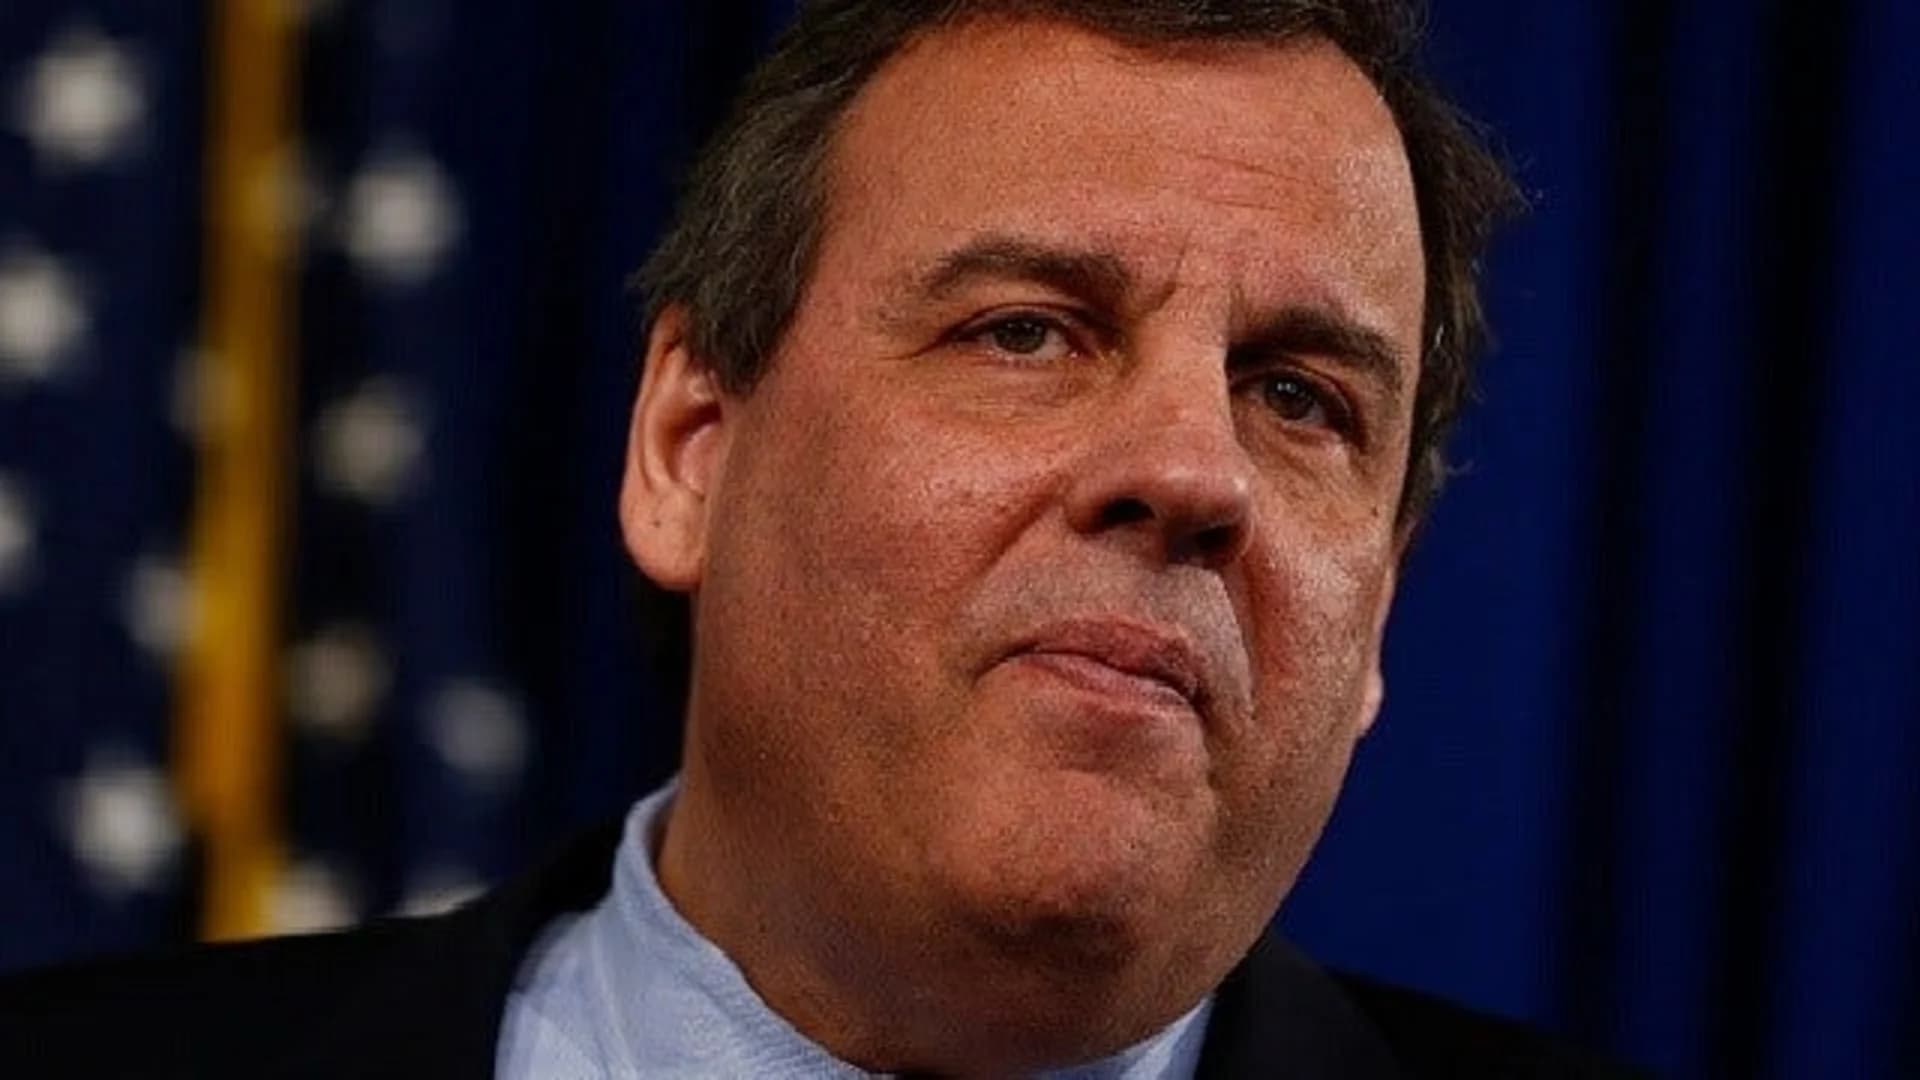 NJ taxpayers pay more for governors’ portraits than neighboring states